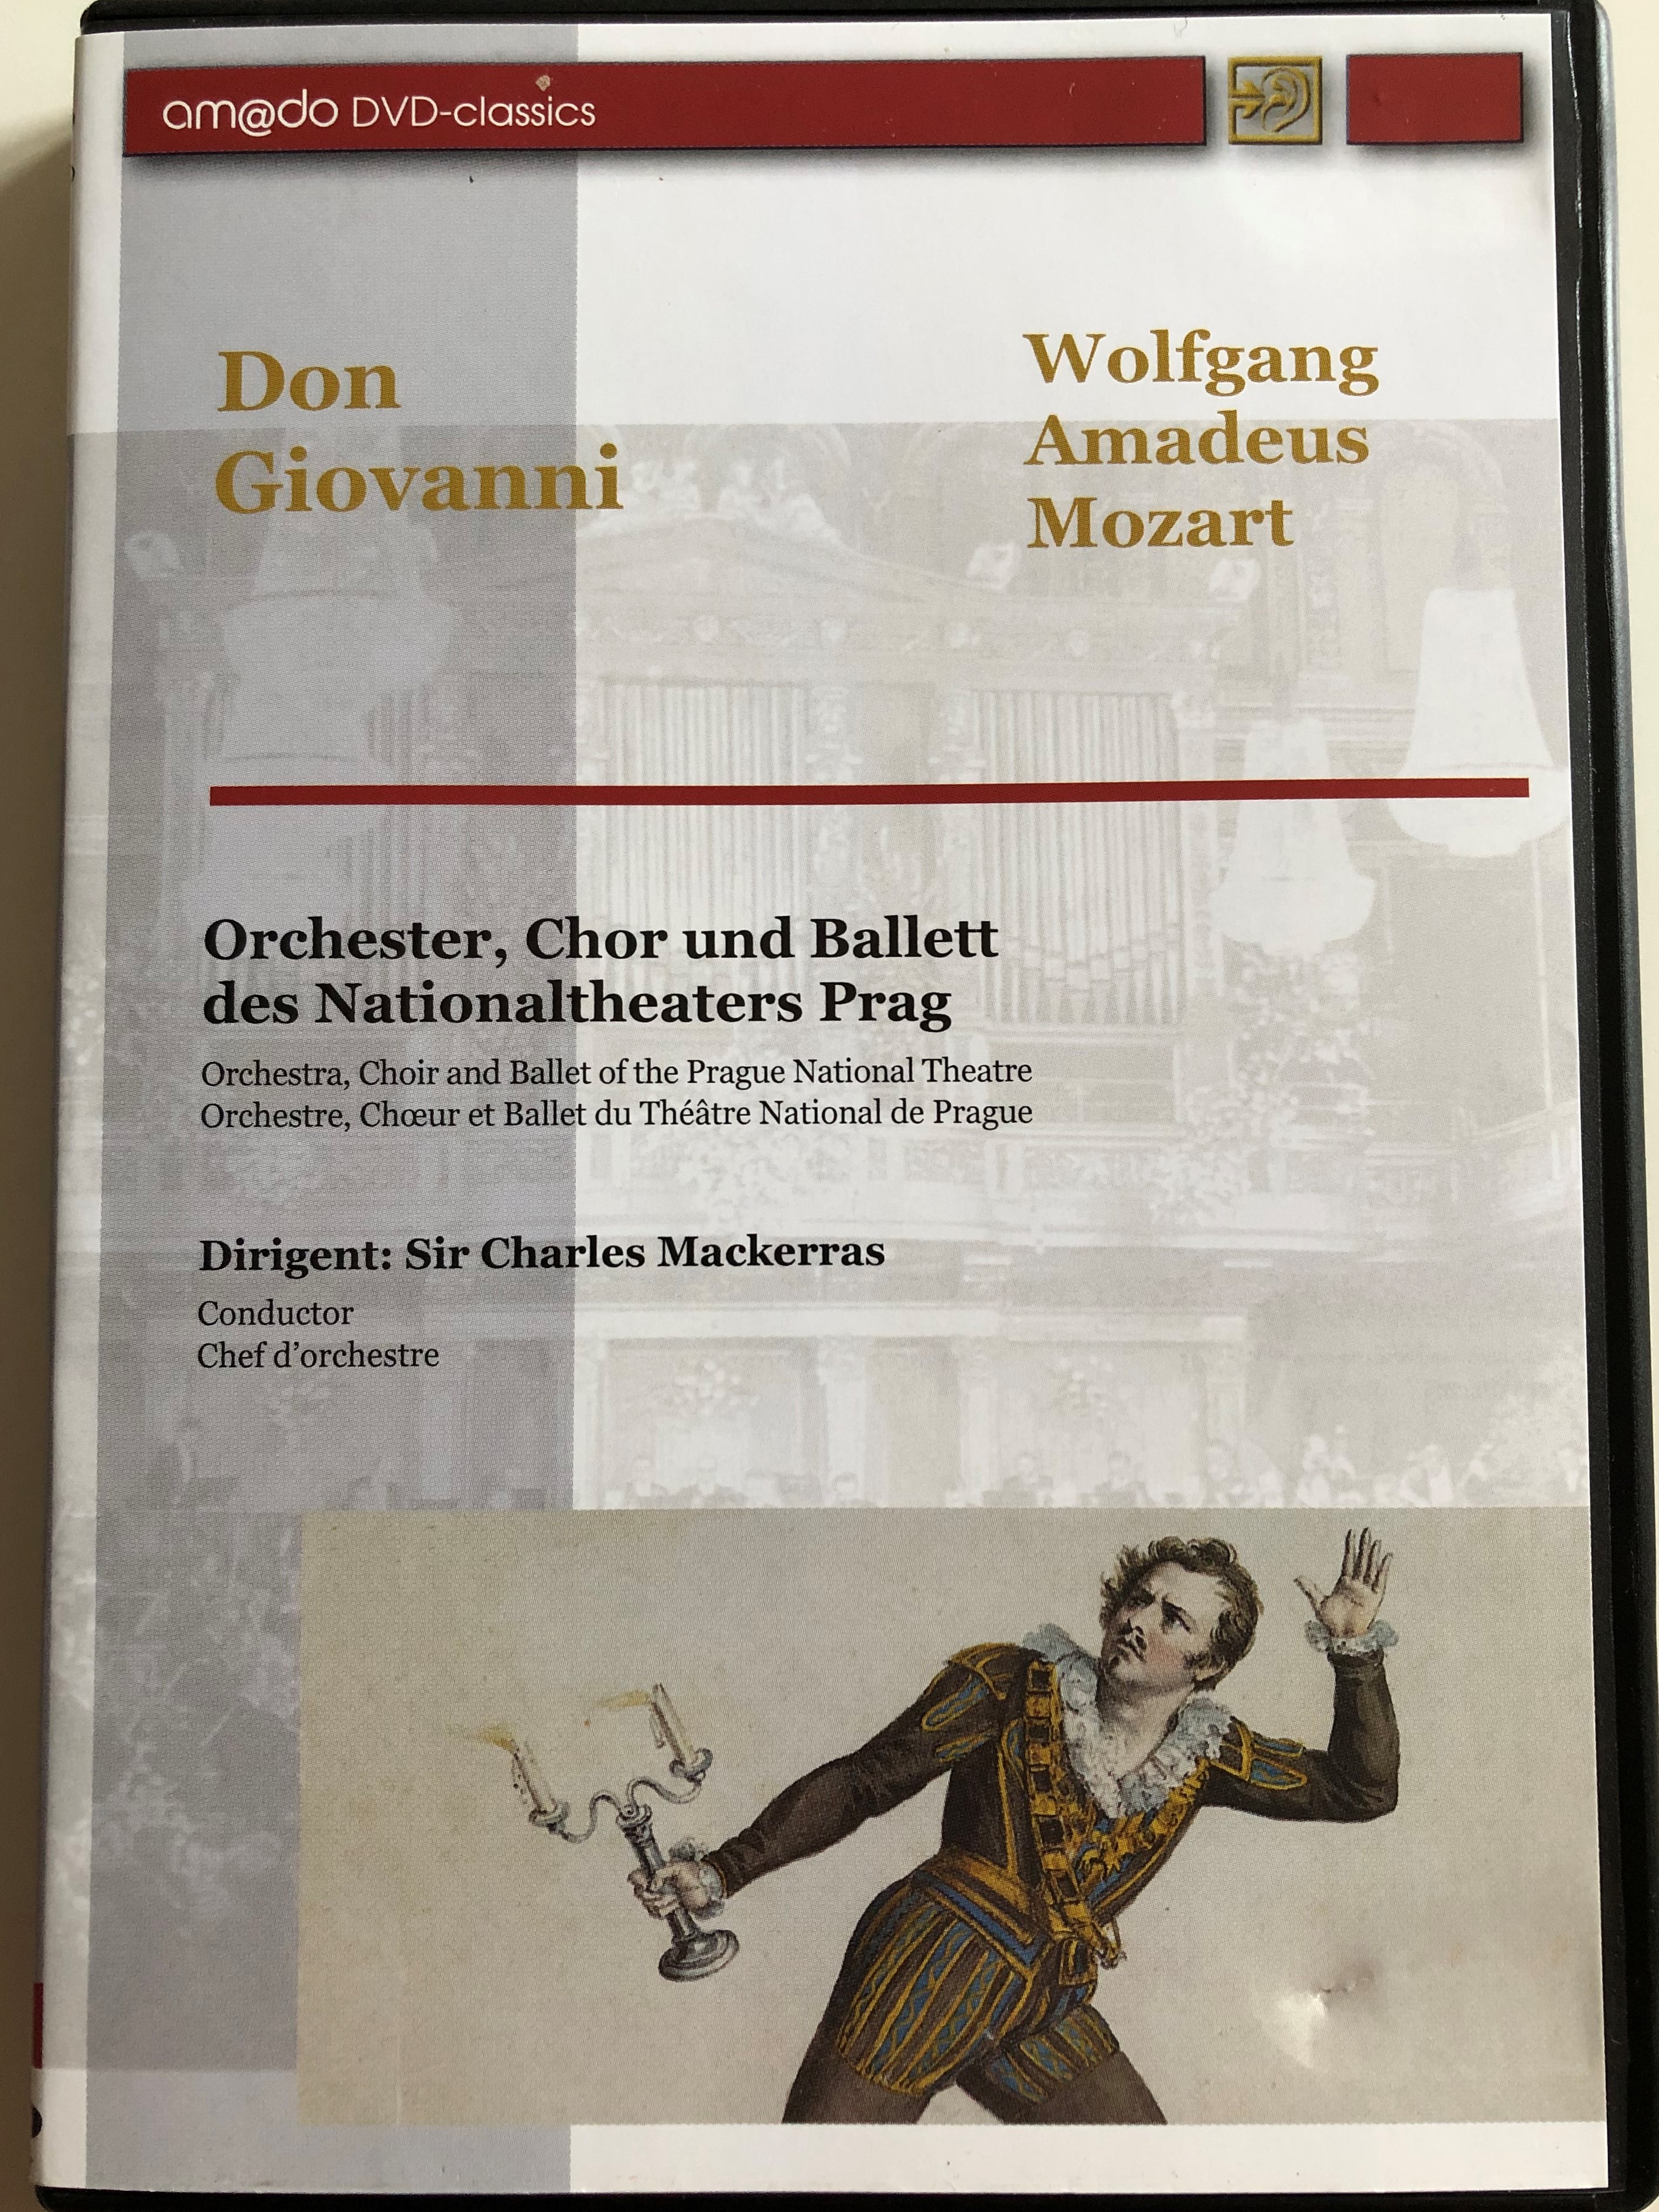 Don Giovanni - Wolfgang Amadeus Mozart DVD / Orchestra, Choir and Ballet of  the Prague National theatre / Conducted by Sir Charles Mackerras / amado  2001 - bibleinmylanguage